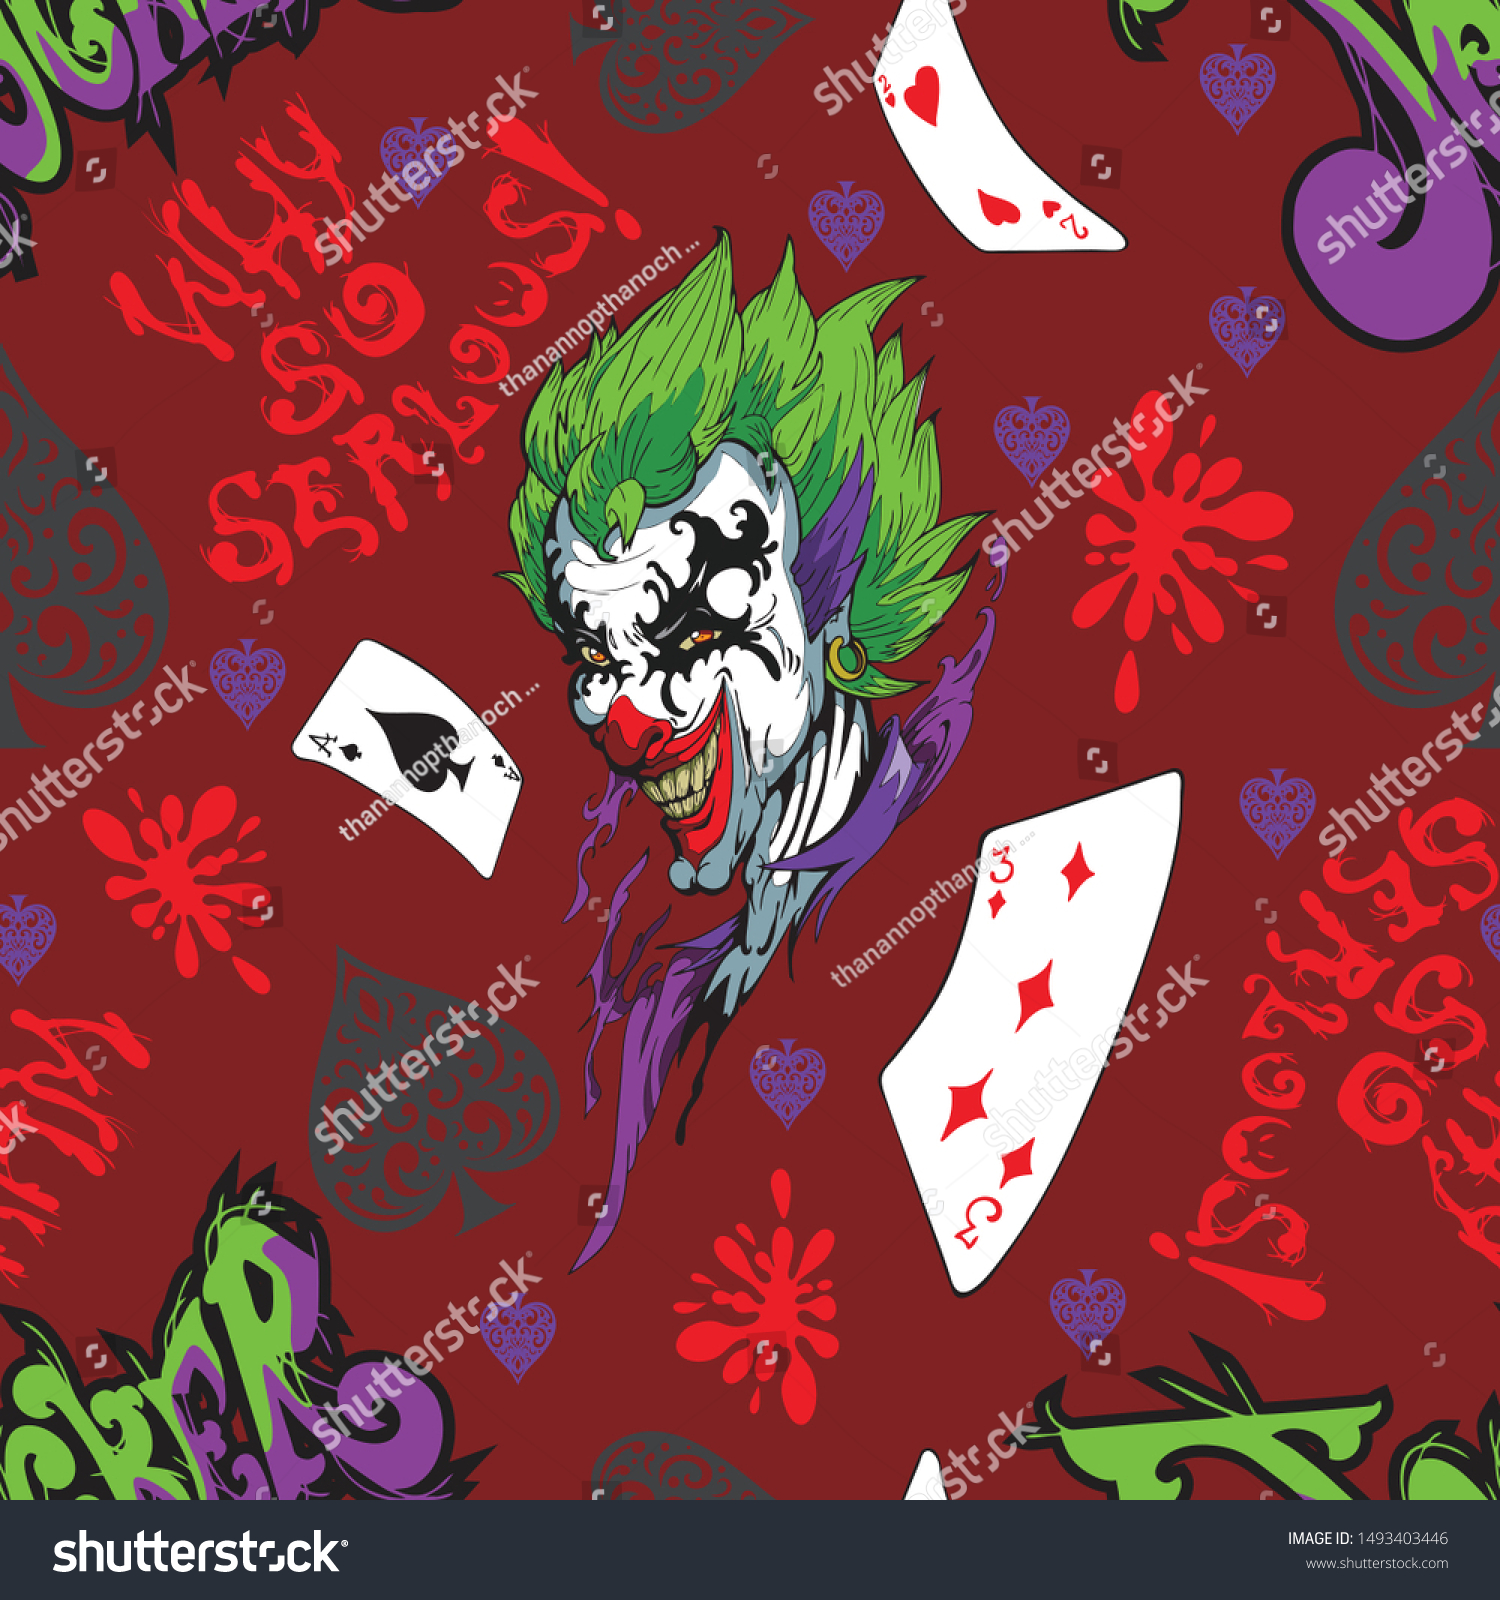 Joker card seamless pattern typhography colorful stock vector royalty free